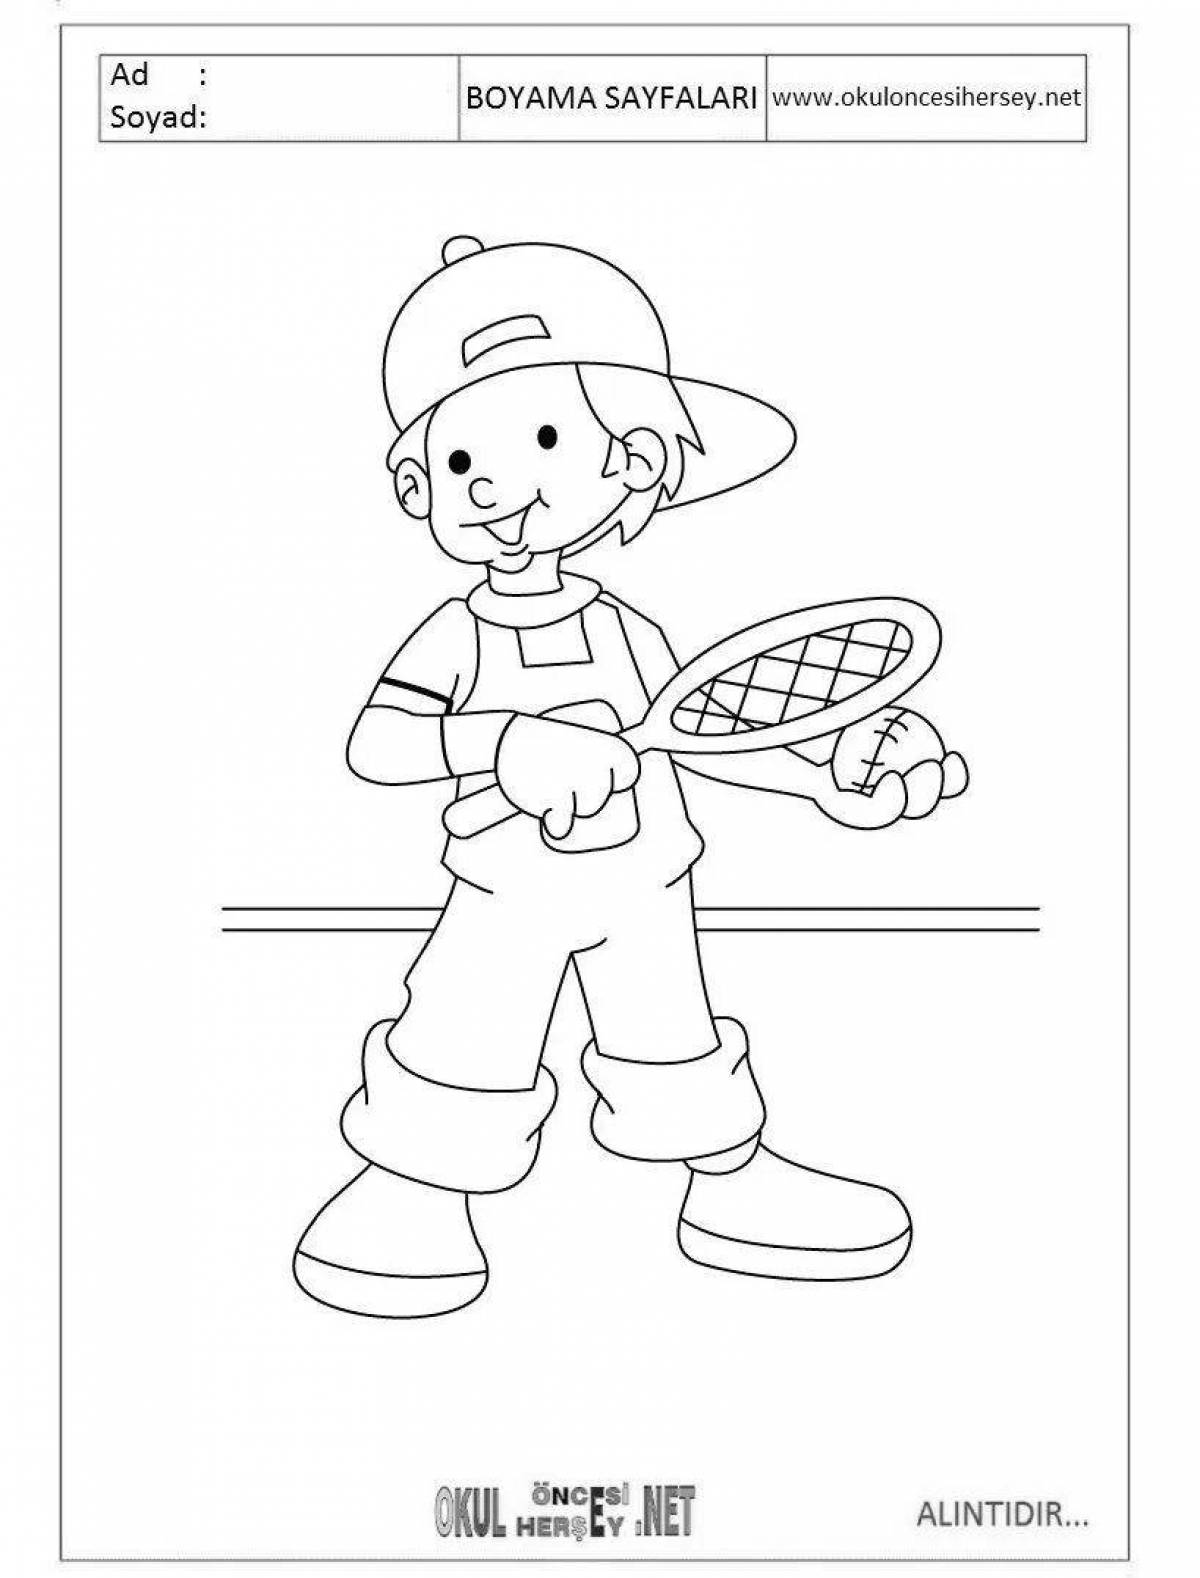 Fabulous sports coloring pages for preschoolers